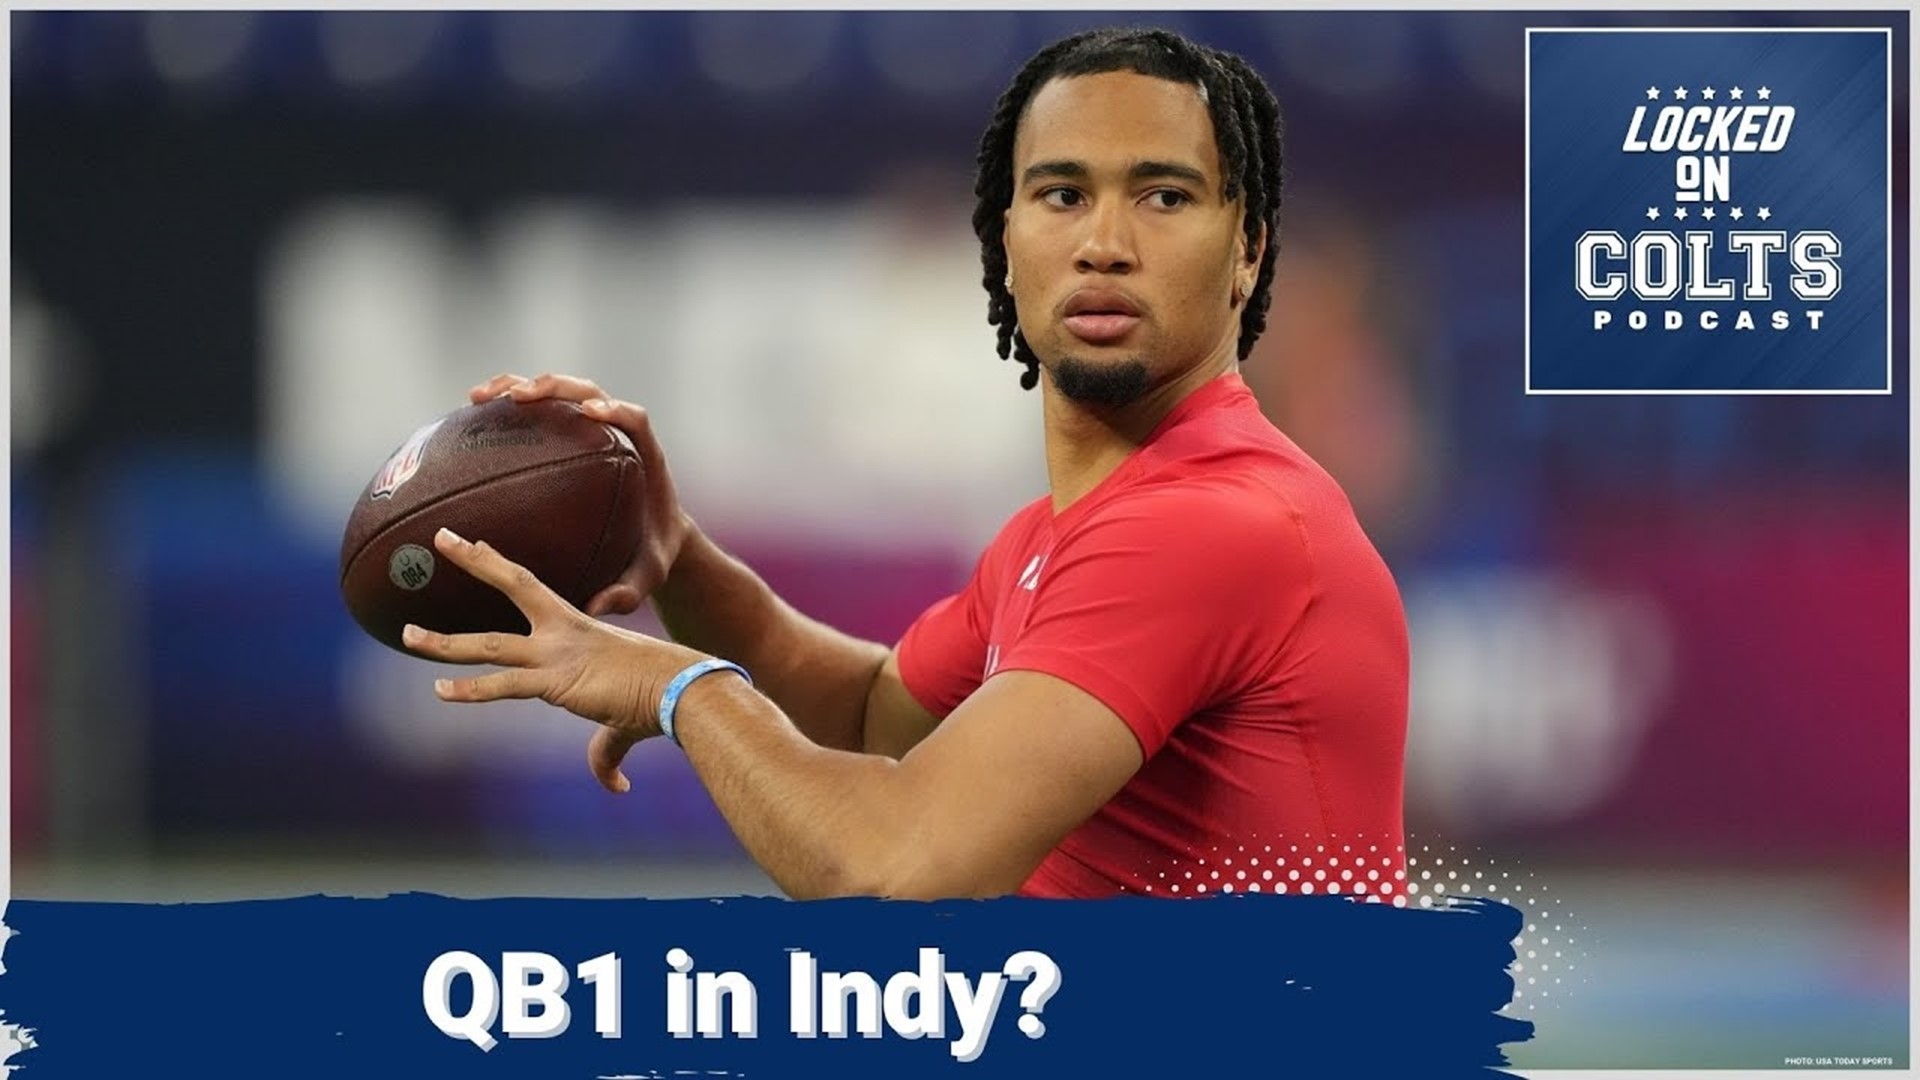 The Indianapolis Colts got to see the top quarterbacks in action this past week. Which player is their QB 1 this draft season? Jake and Zach discuss on today's show.